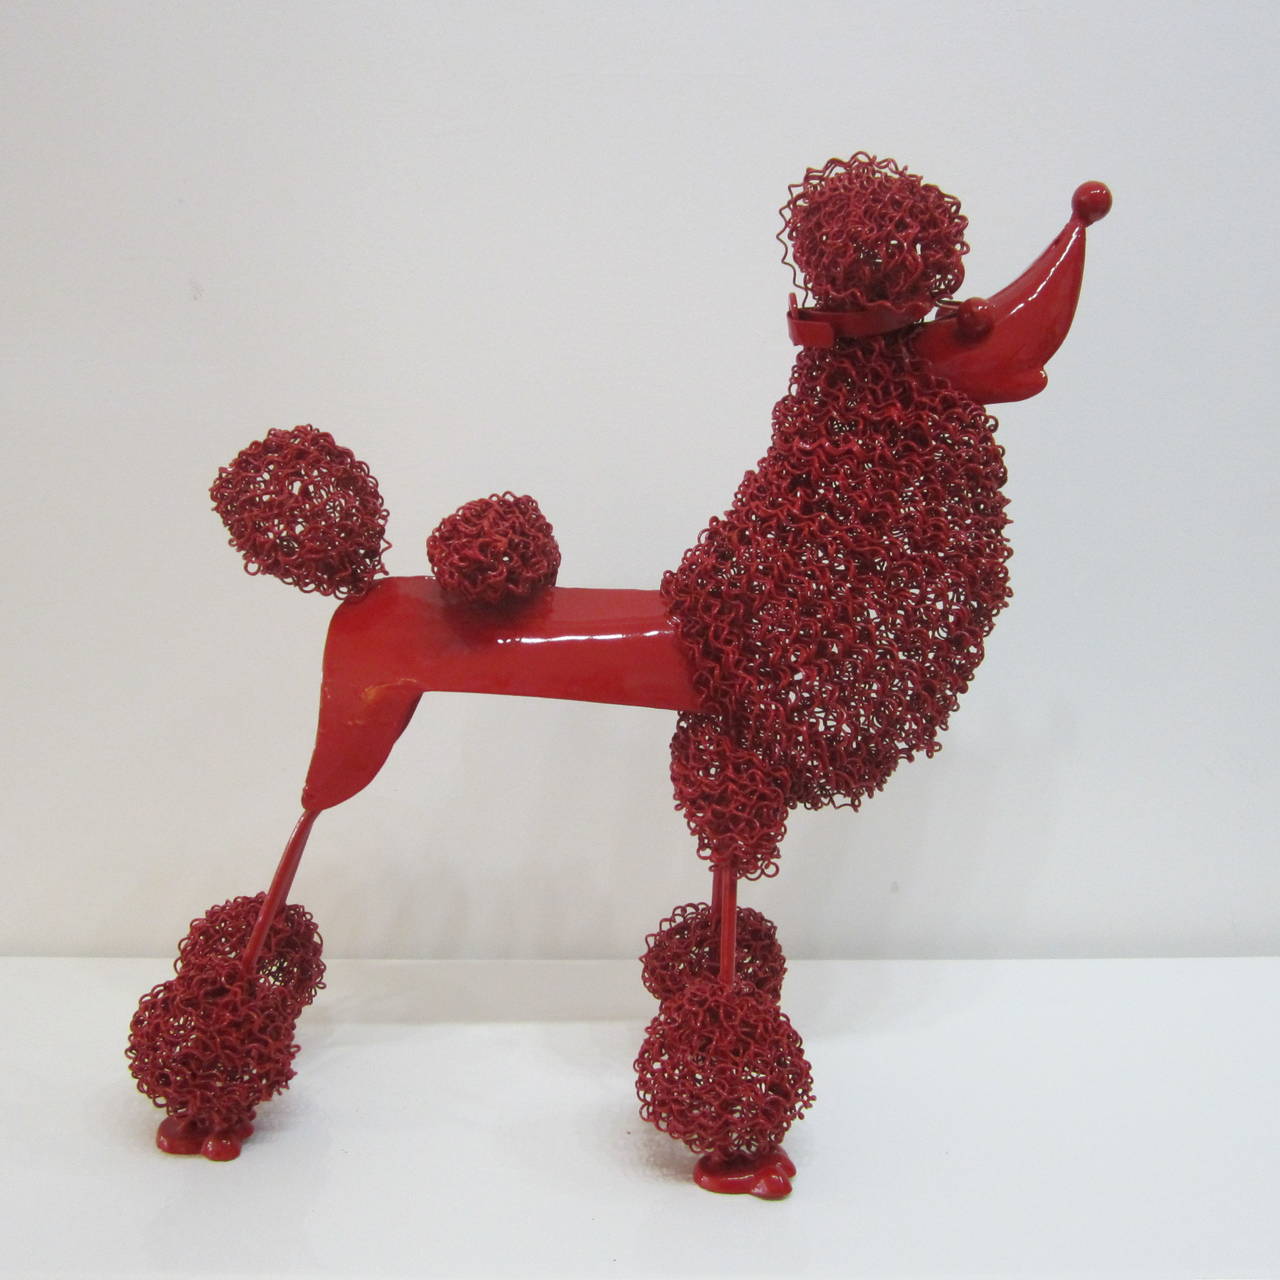 Adorable metal standard poodle sculpture lacquered in fire engine red. Curly wire used as fur and body is all metal.